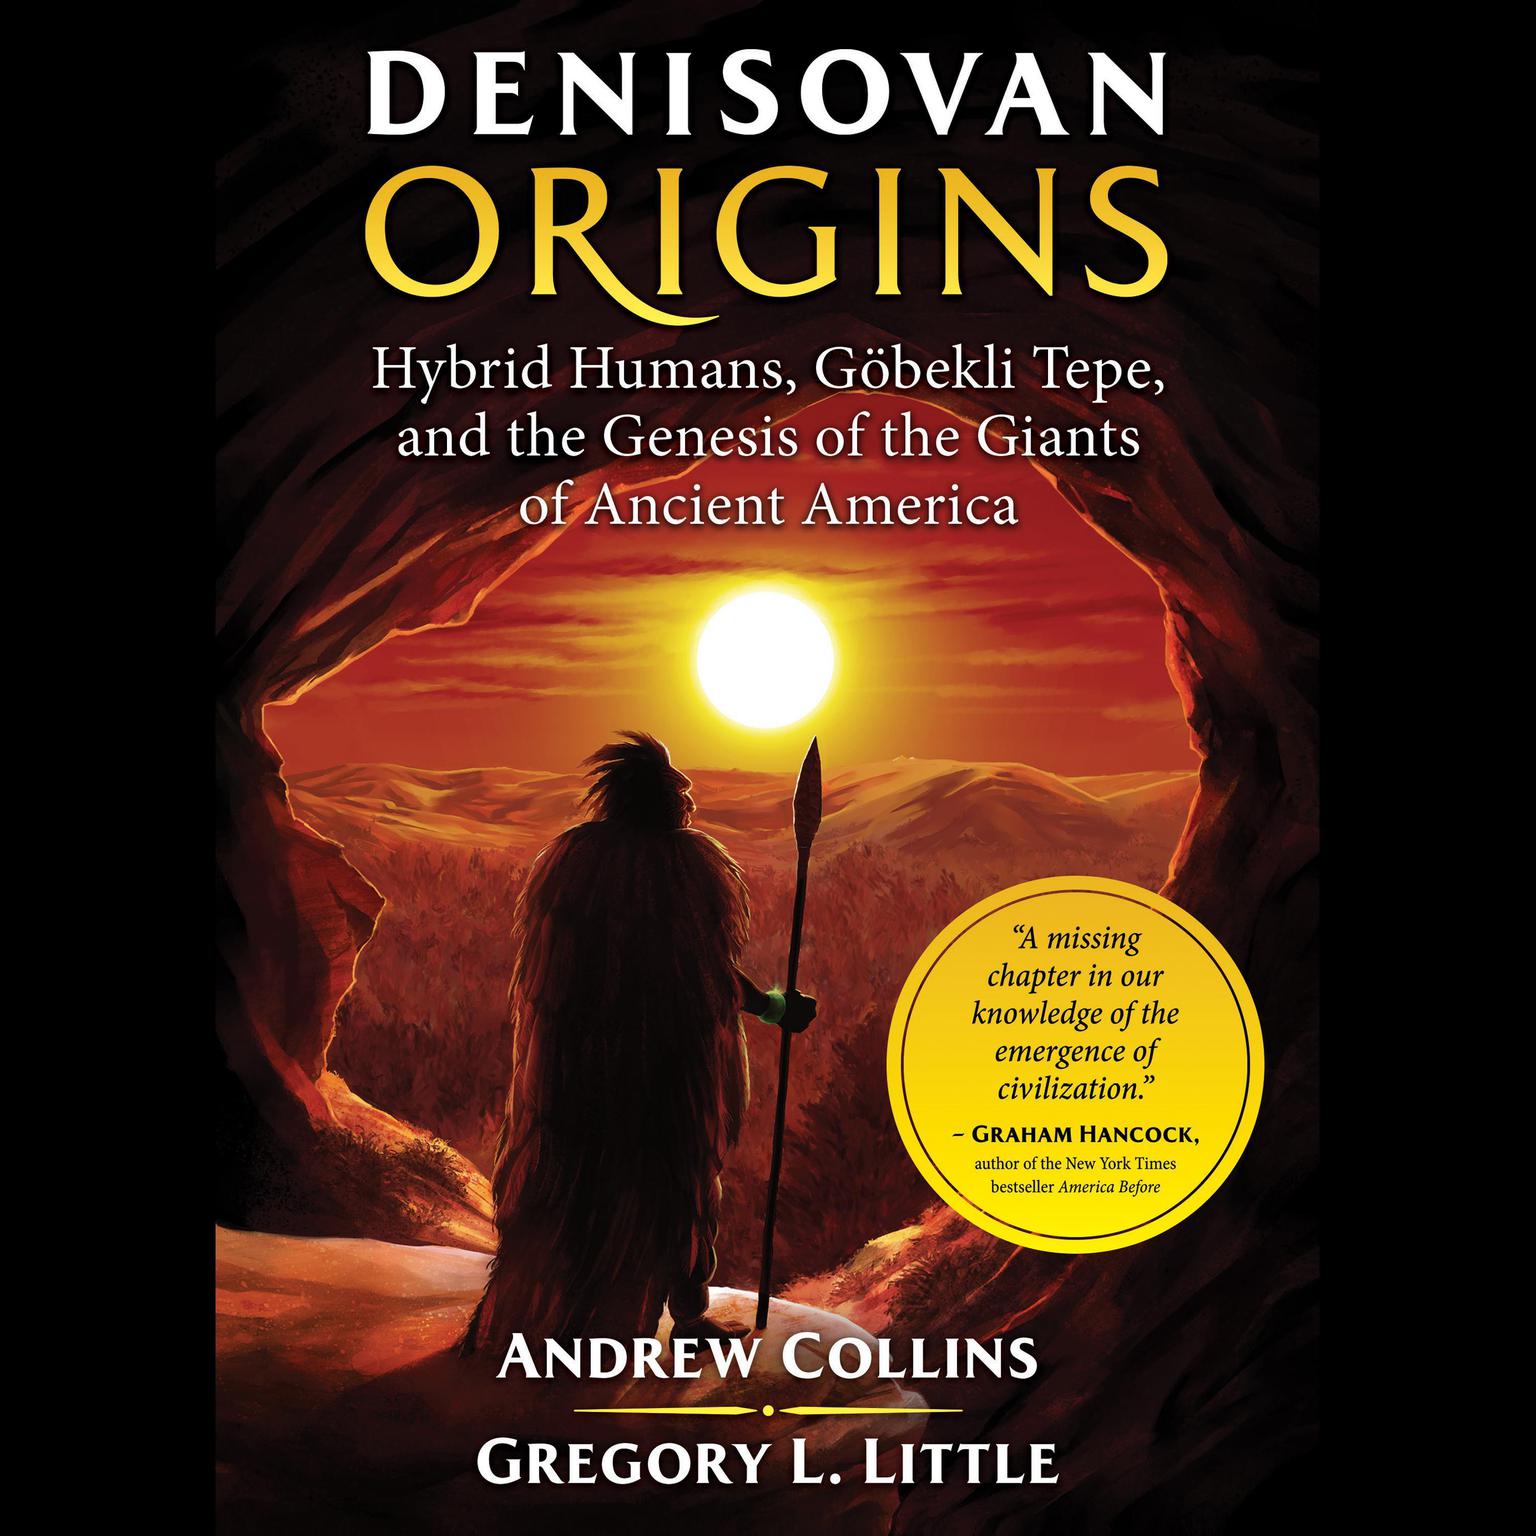 Denisovan Origins: Hybrid Humans, Göbekli Tepe, and the Genesis of the Giants of Ancient America Audiobook, by Andrew Collins